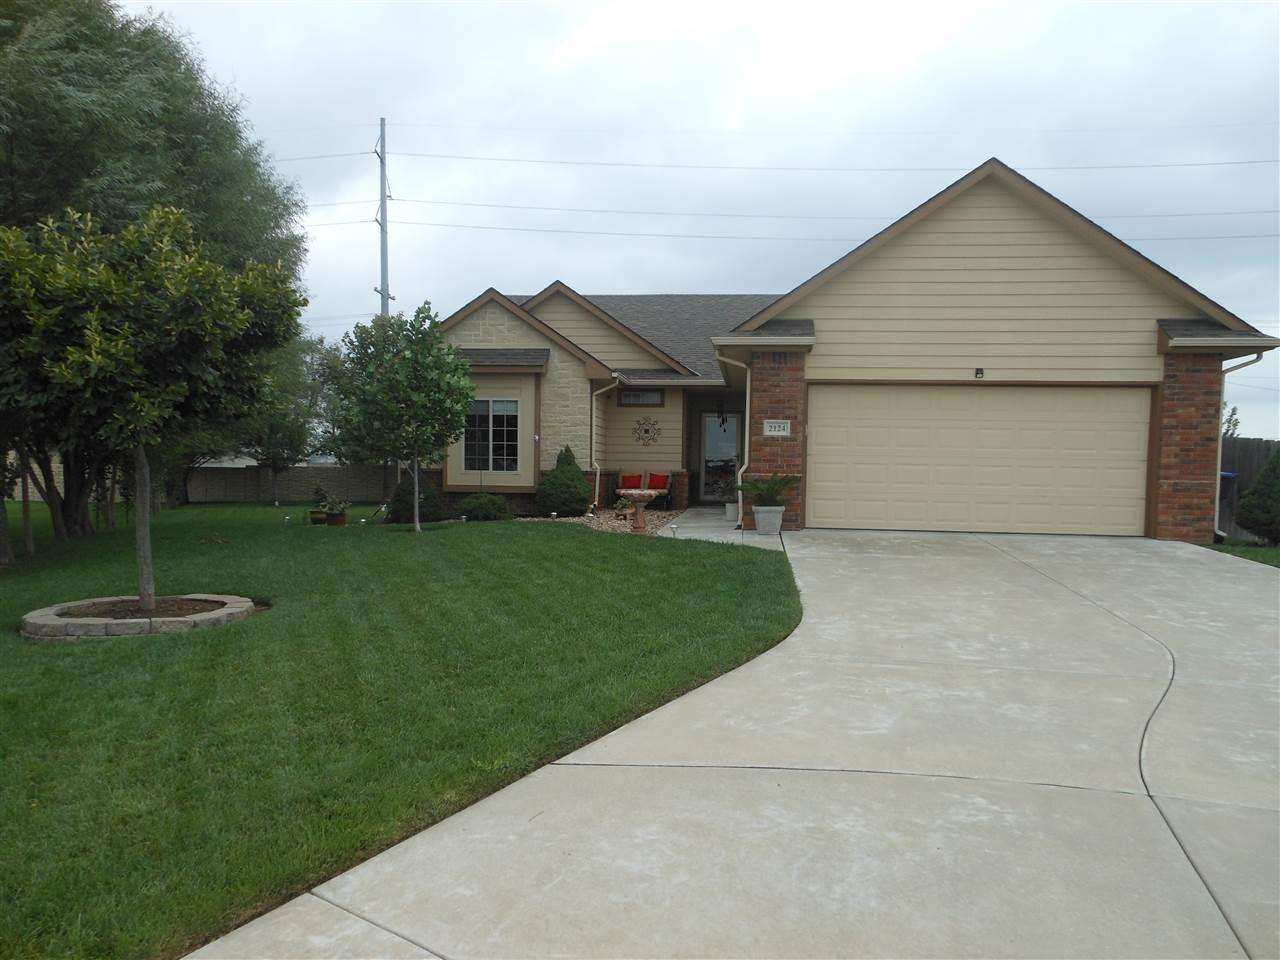 Well maintained, one owner home located in the Sand Creek Station community. This home features no s